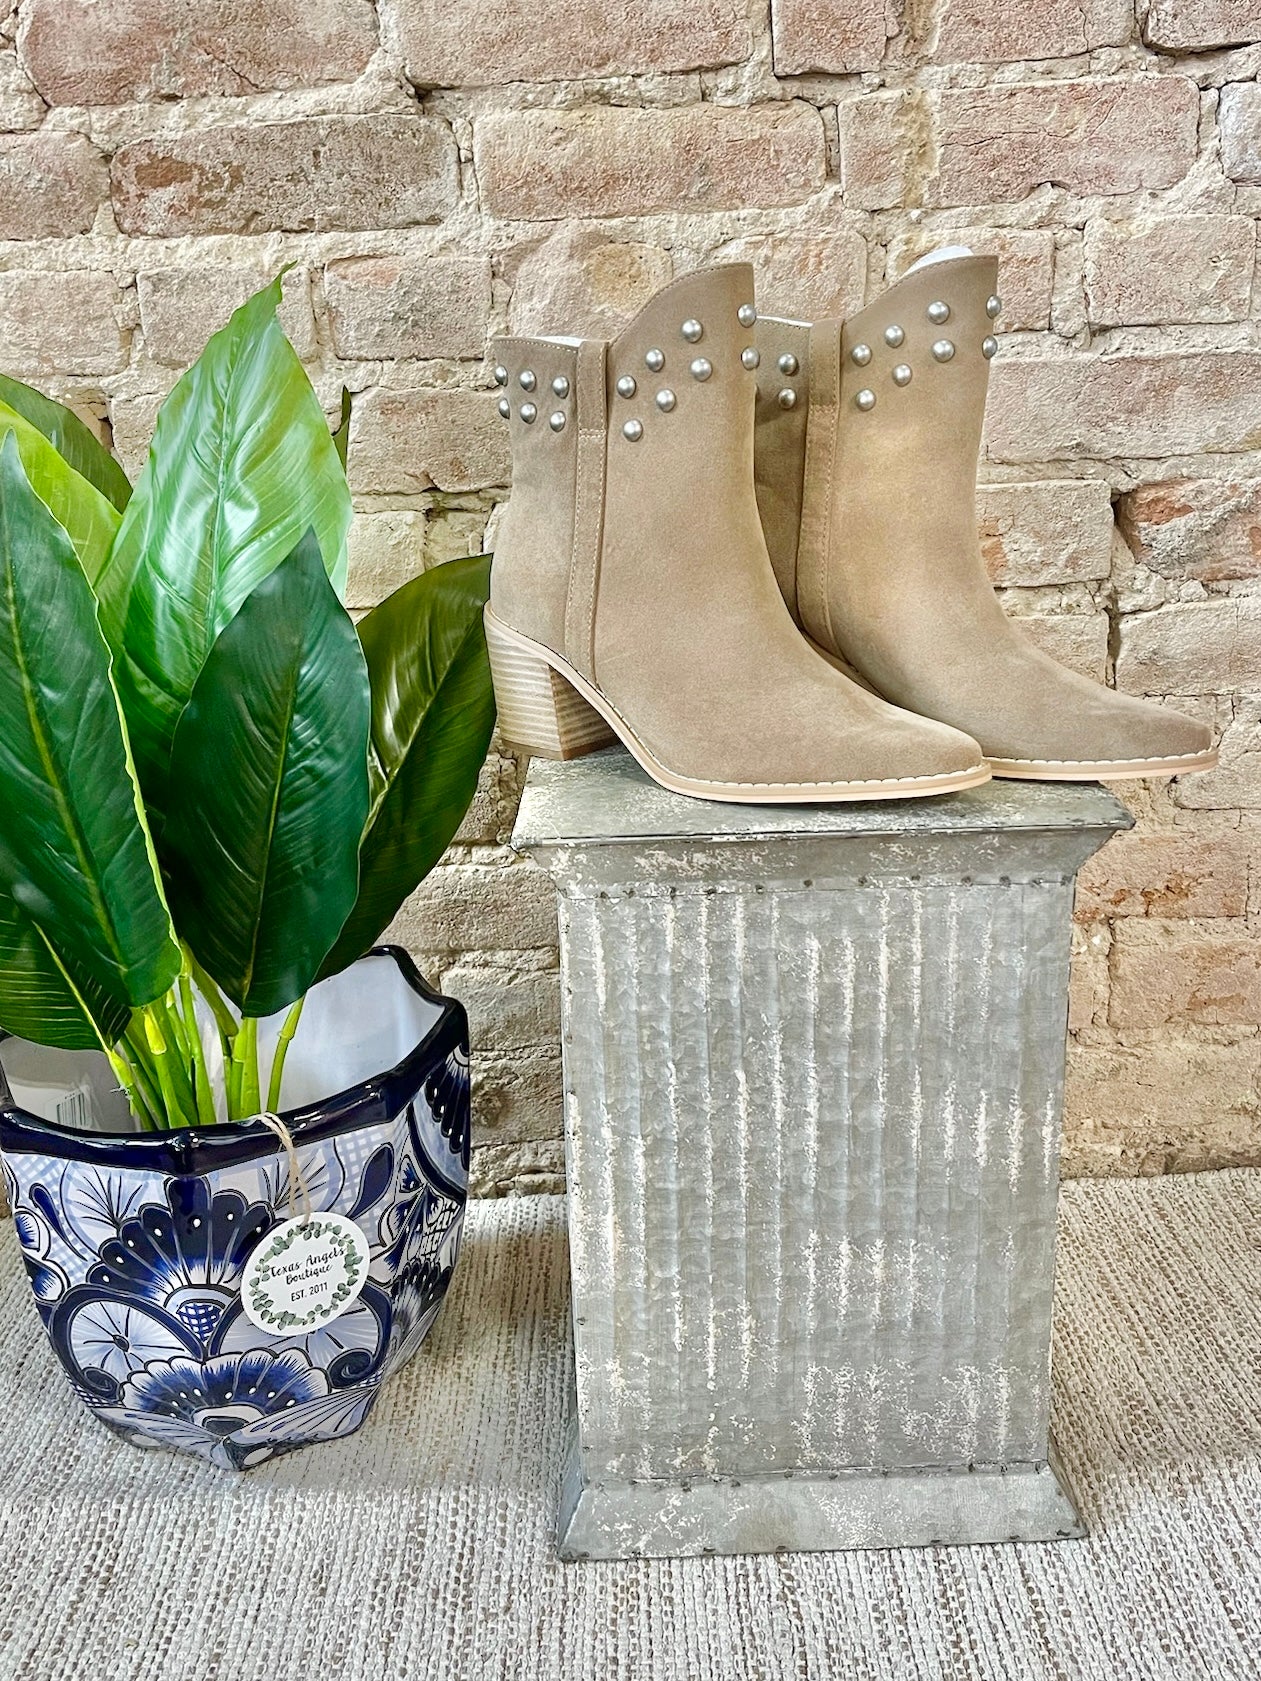 Totally Into You Taupe Studded Booties